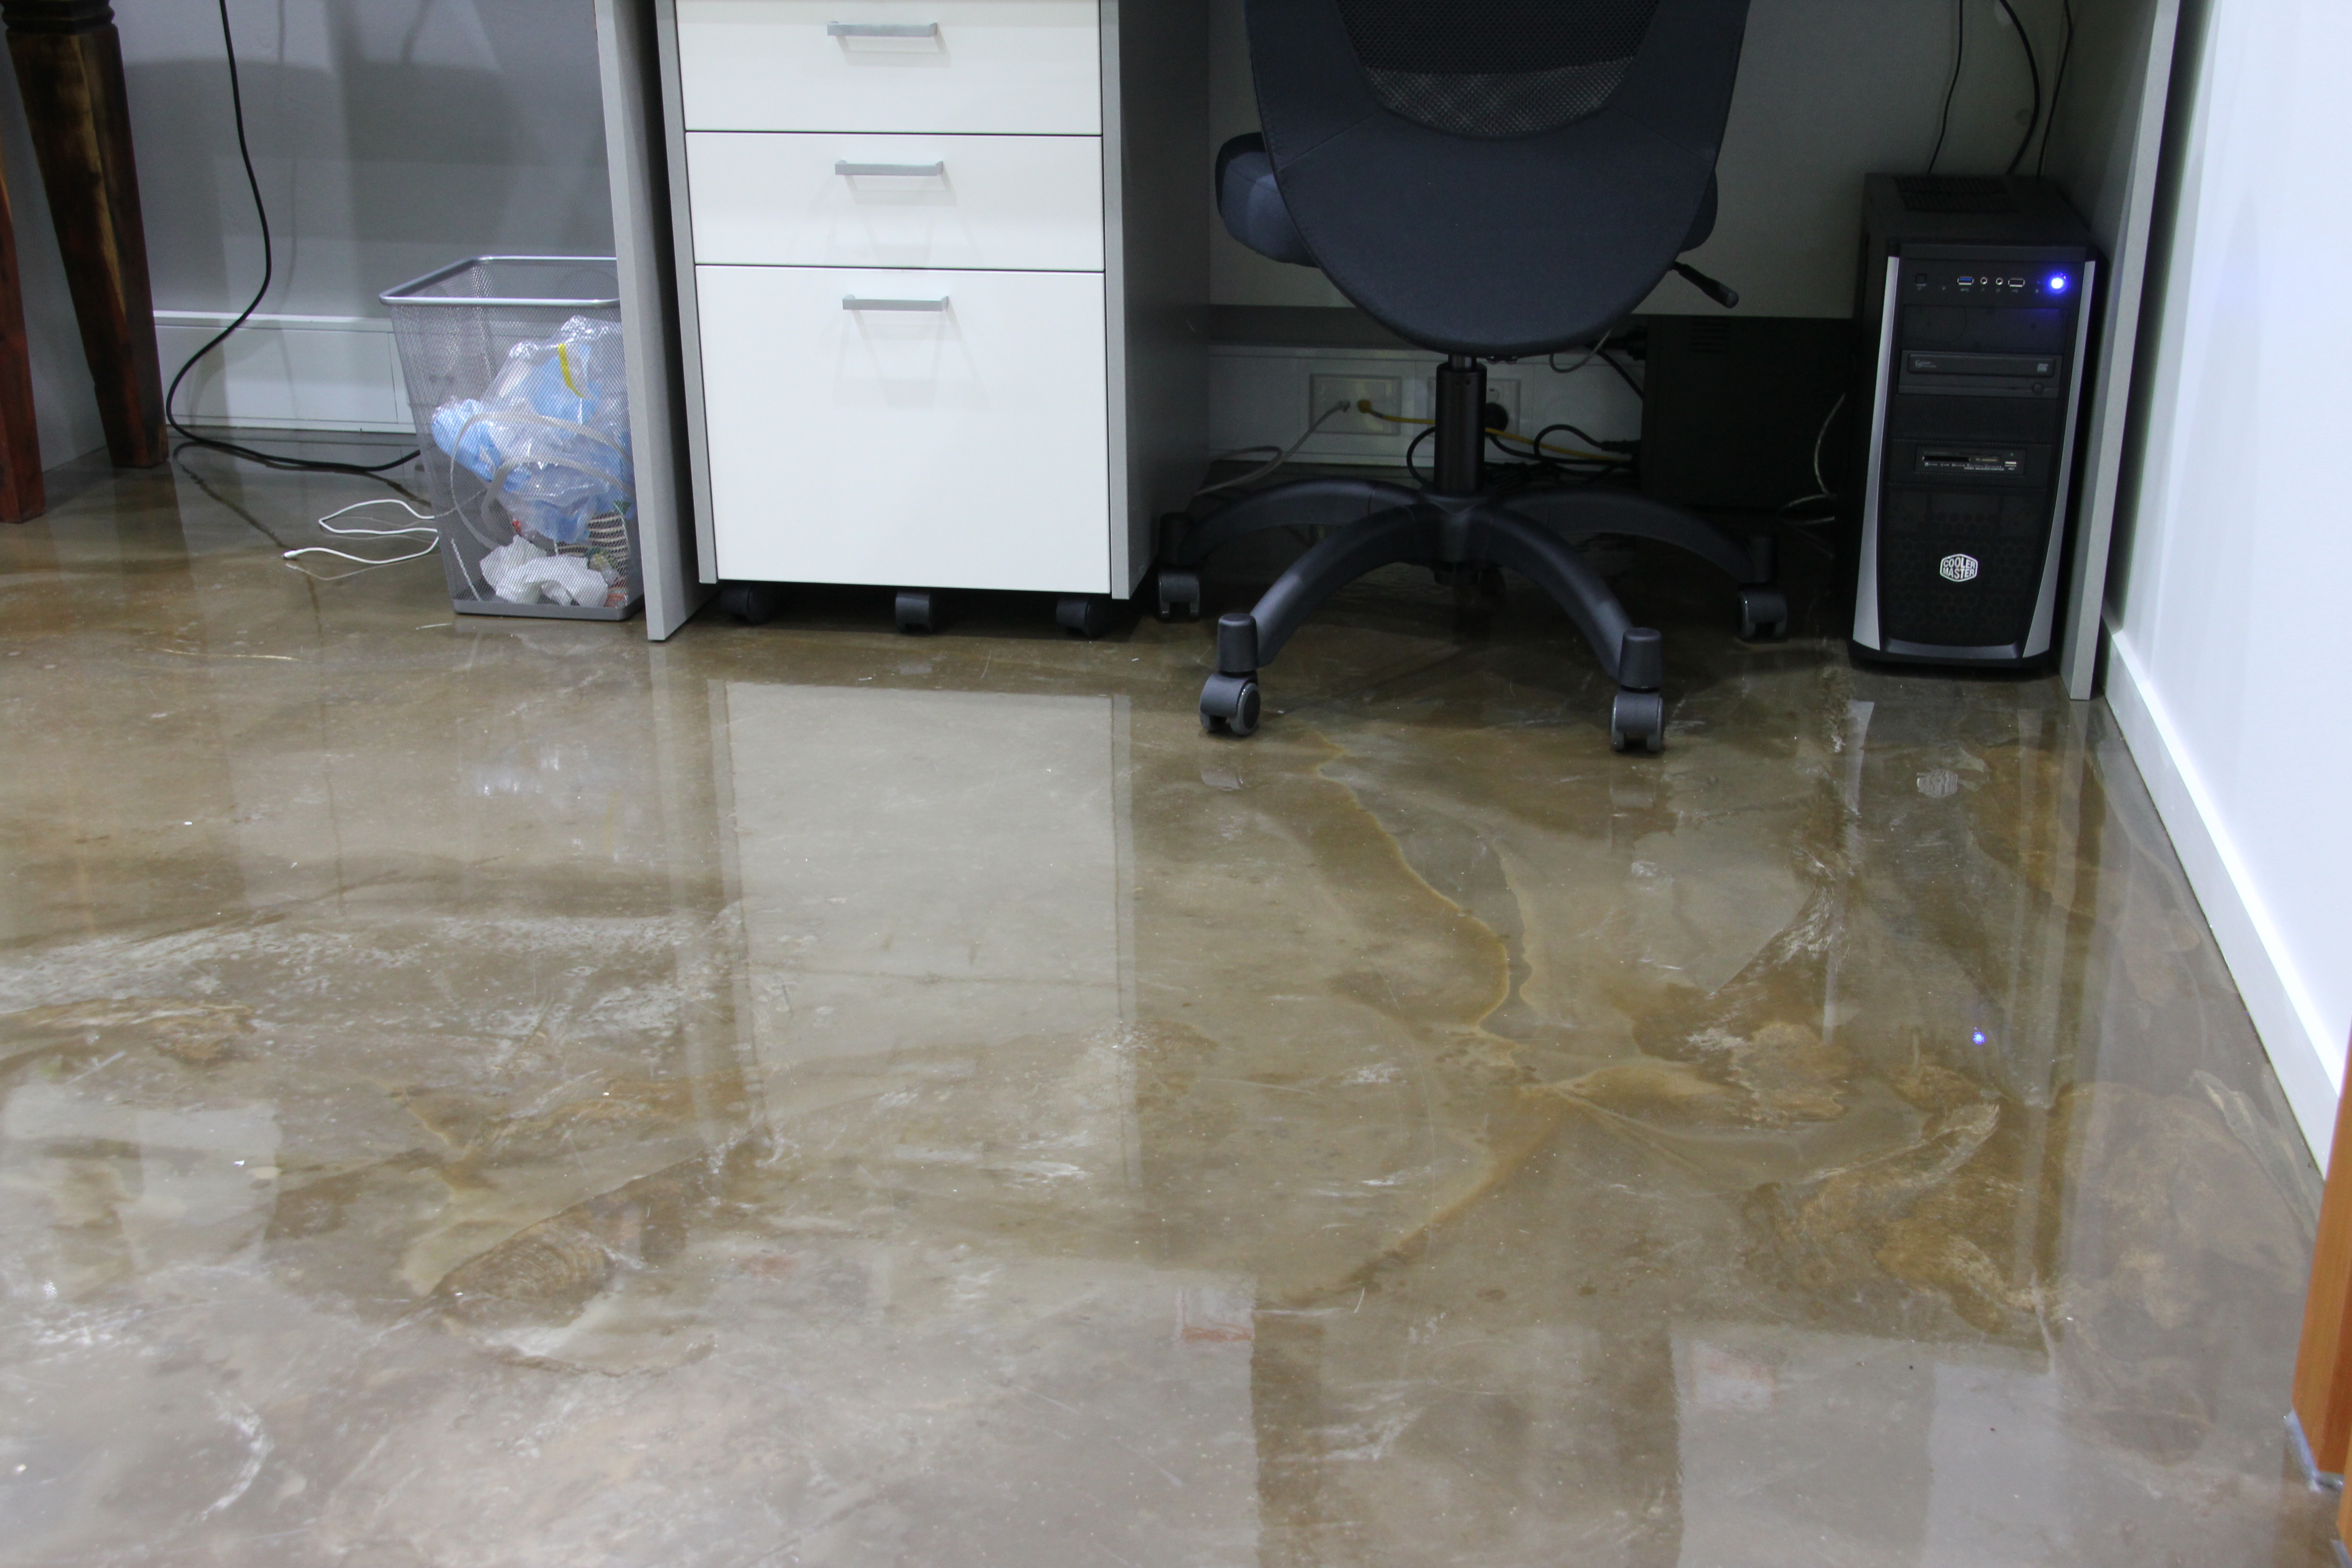 One of the desks in the office sitting on top of the decorative epoxy floor.